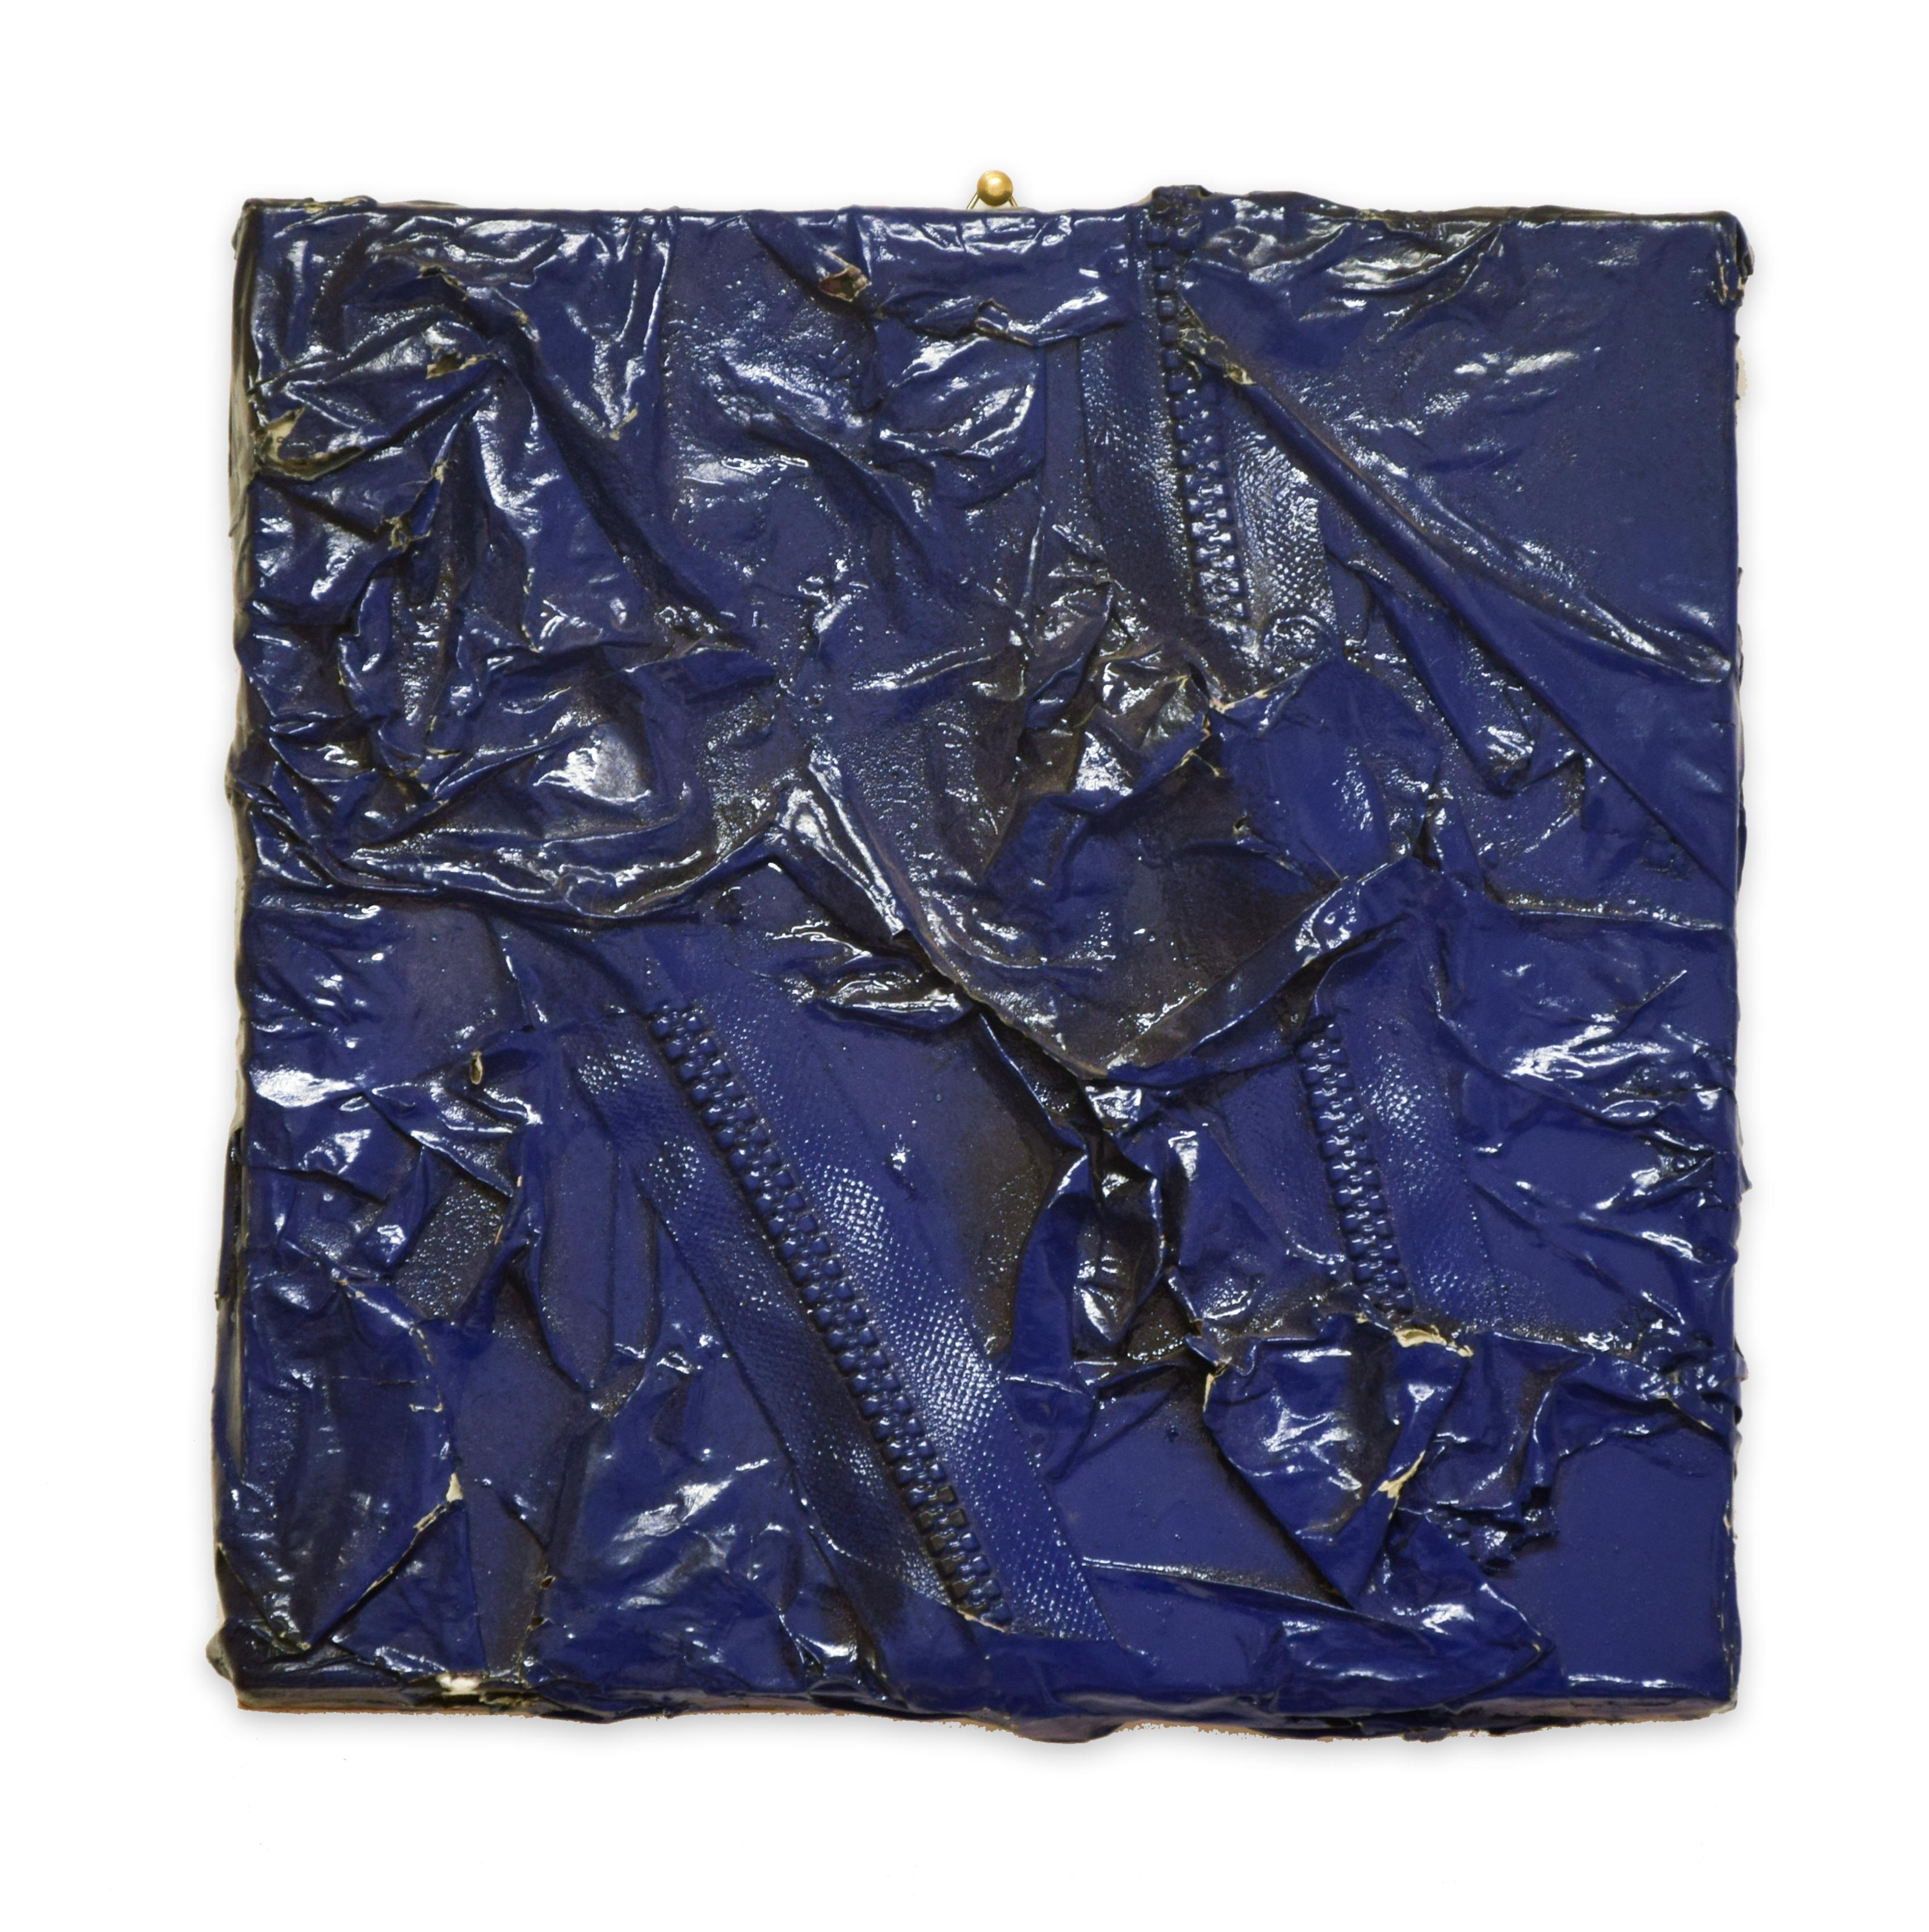 Charlotte Ritzow Abstract Painting - Deep Blue  - Acrylic, Enamel and Zip Collage on Paper - 2010